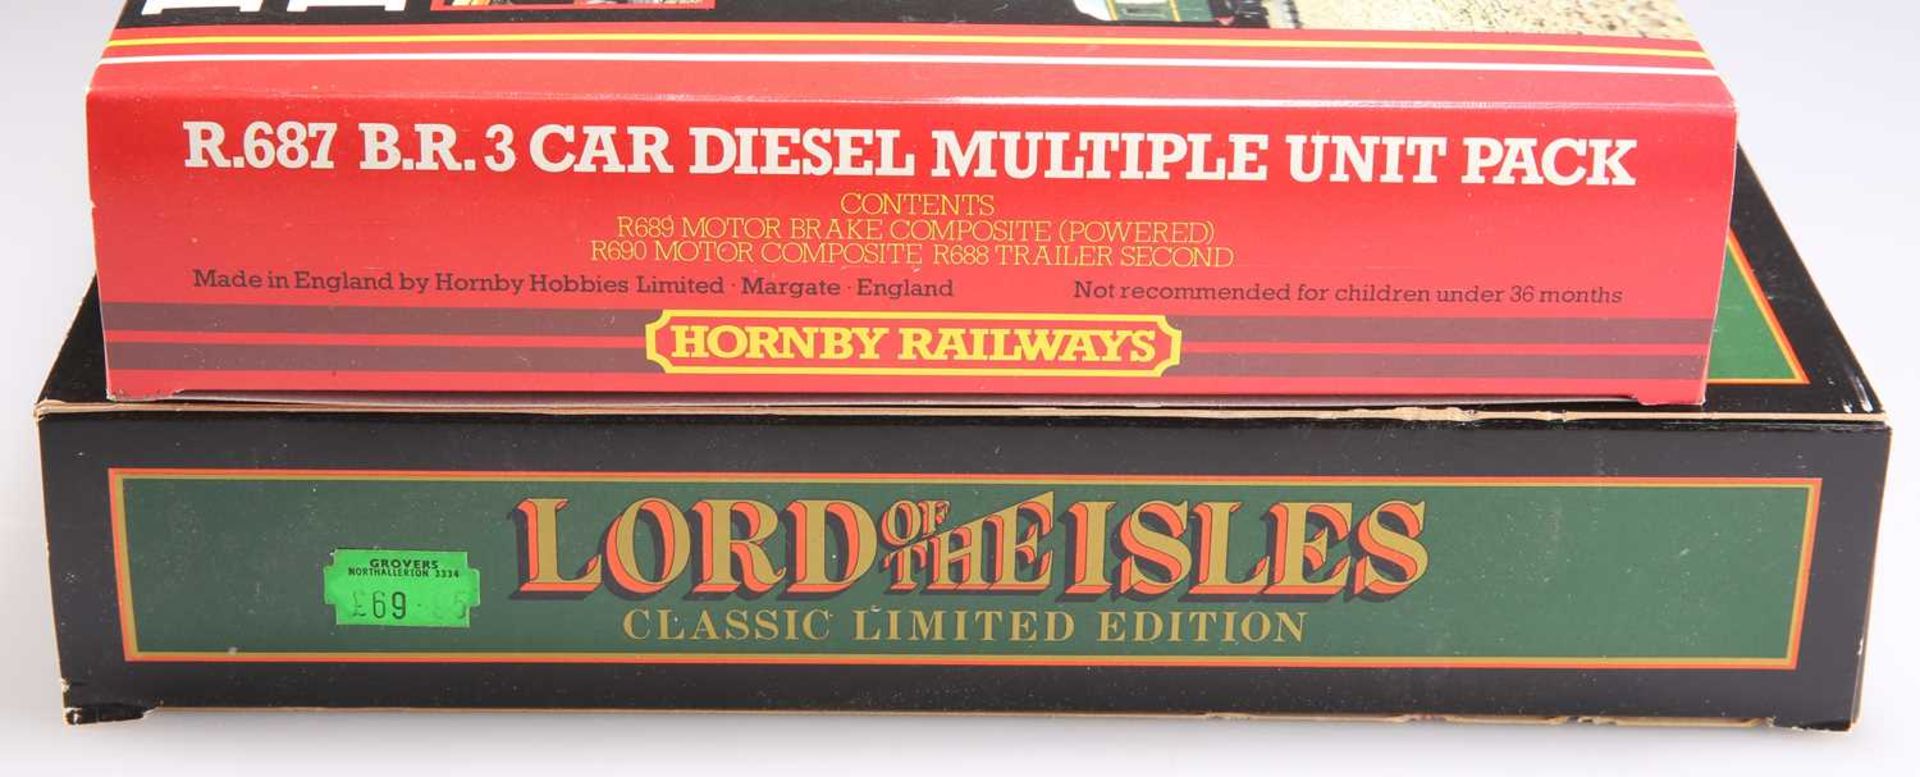 A HORNBY B.R. 3 CAR DIESEL MULTIPLE UNIT PACK AND HORNBY LORD OF THE ISLES GREAT WESTERN RAILWAY SET - Bild 2 aus 2